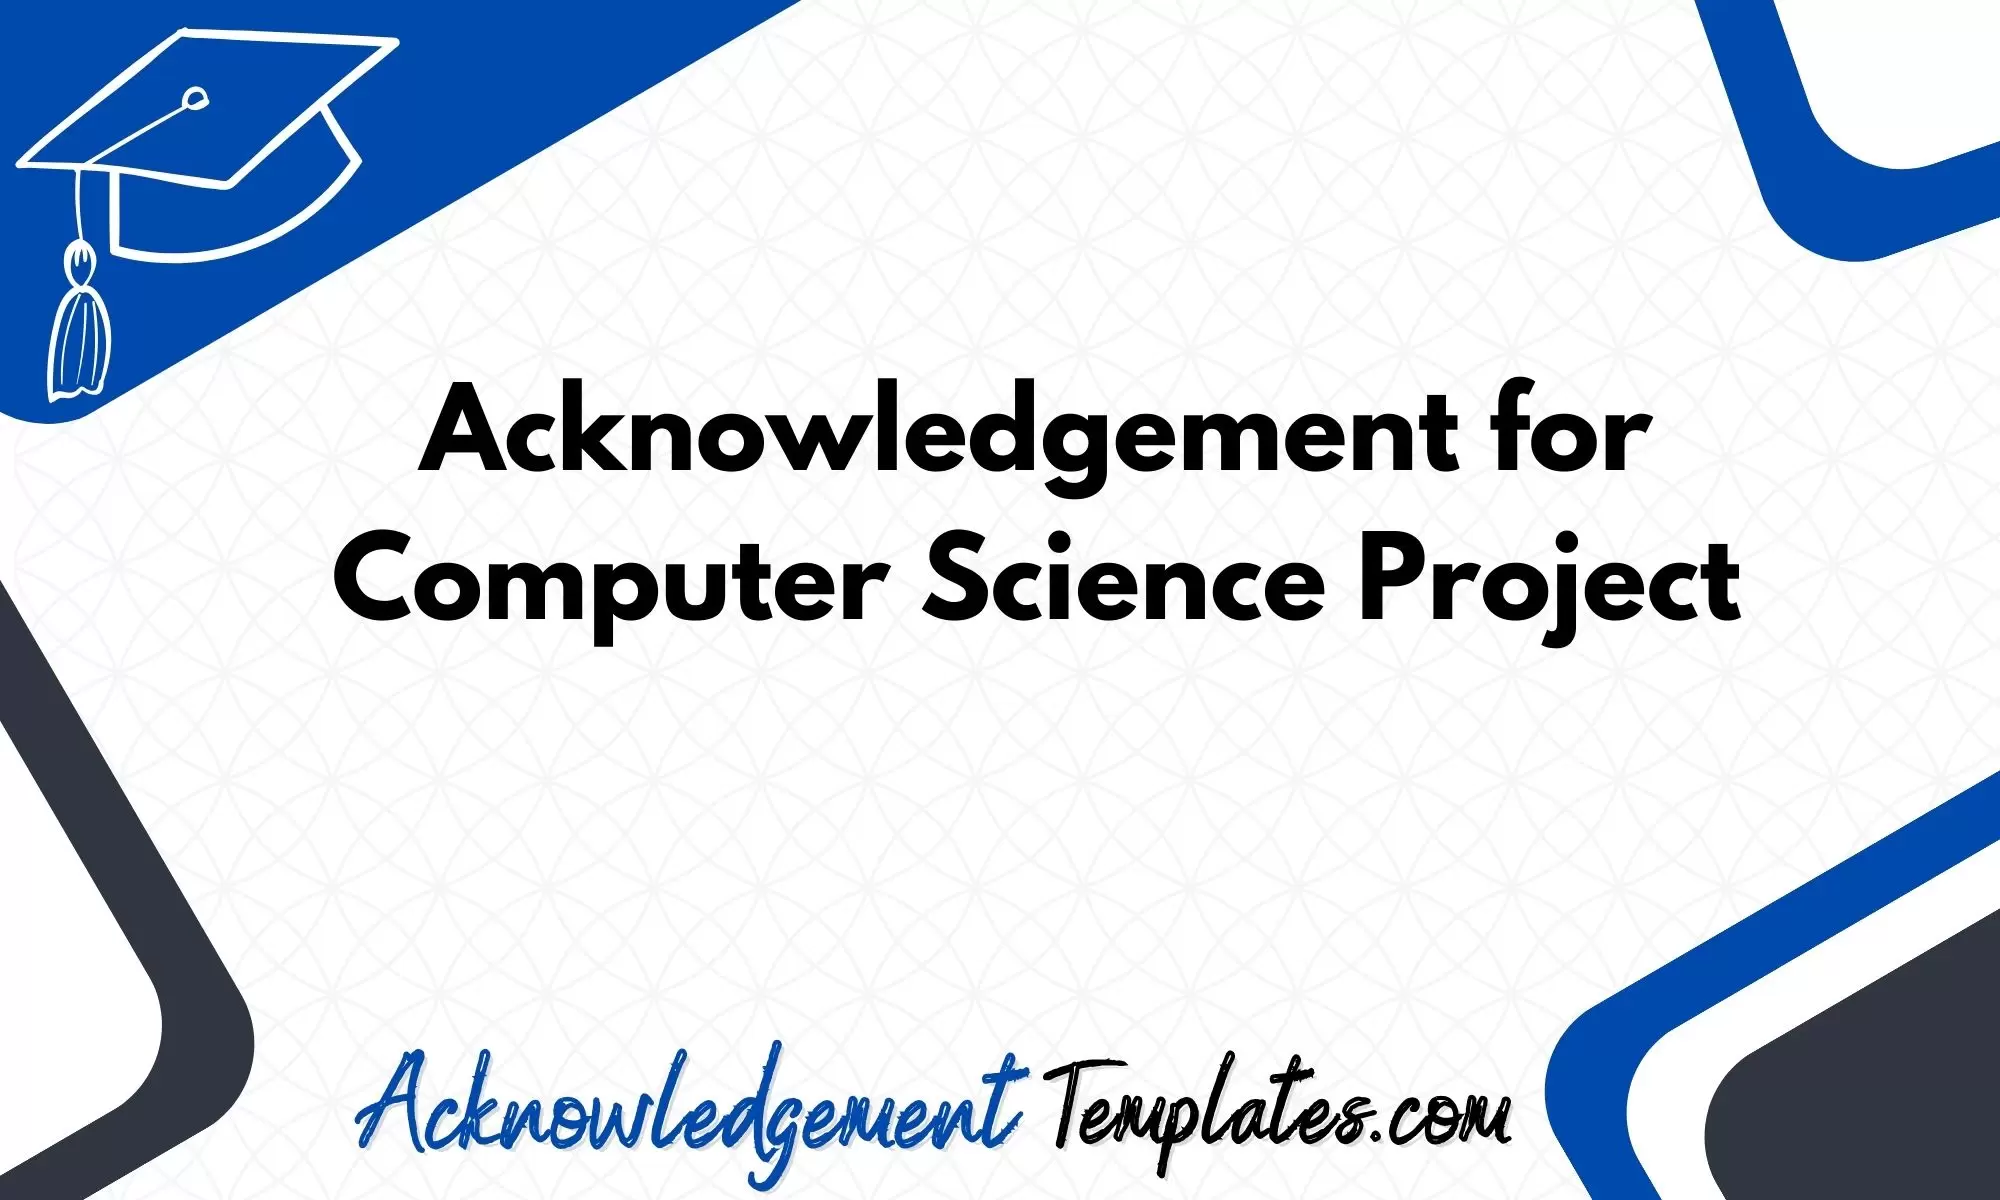 Acknowledgement for Computer Science Project